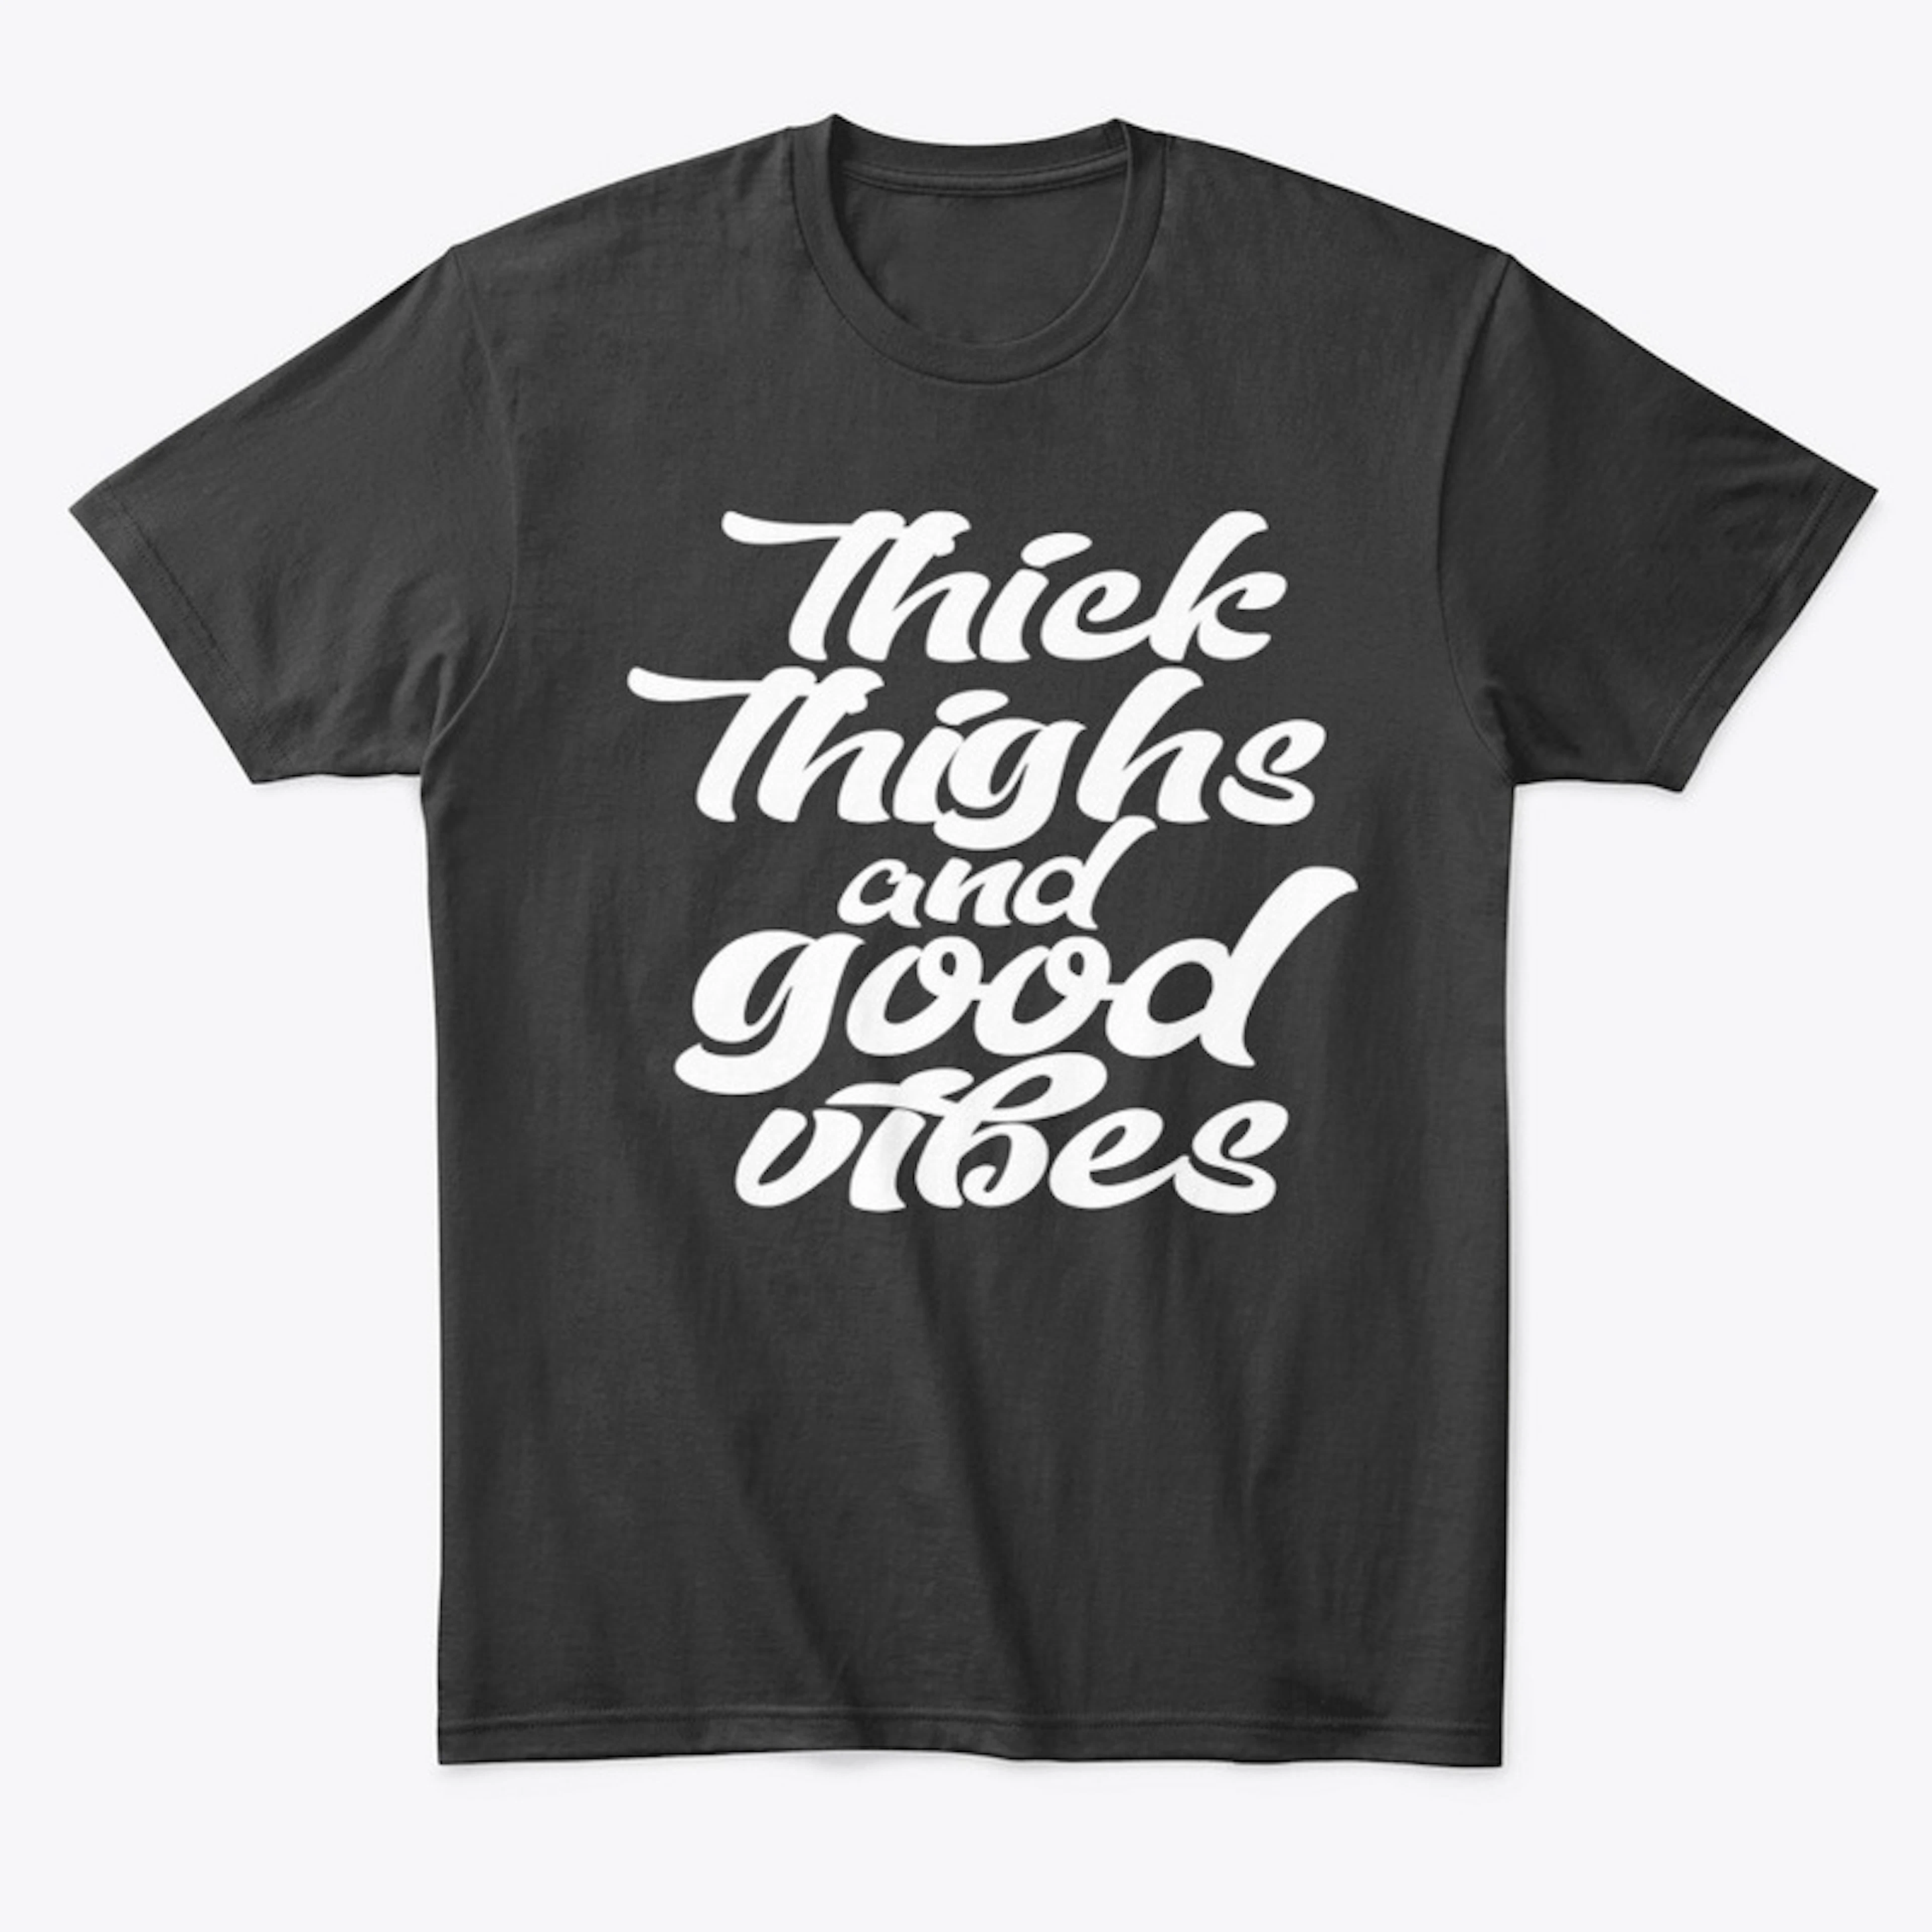 Thick Thighs and Good Vibes T Shirt